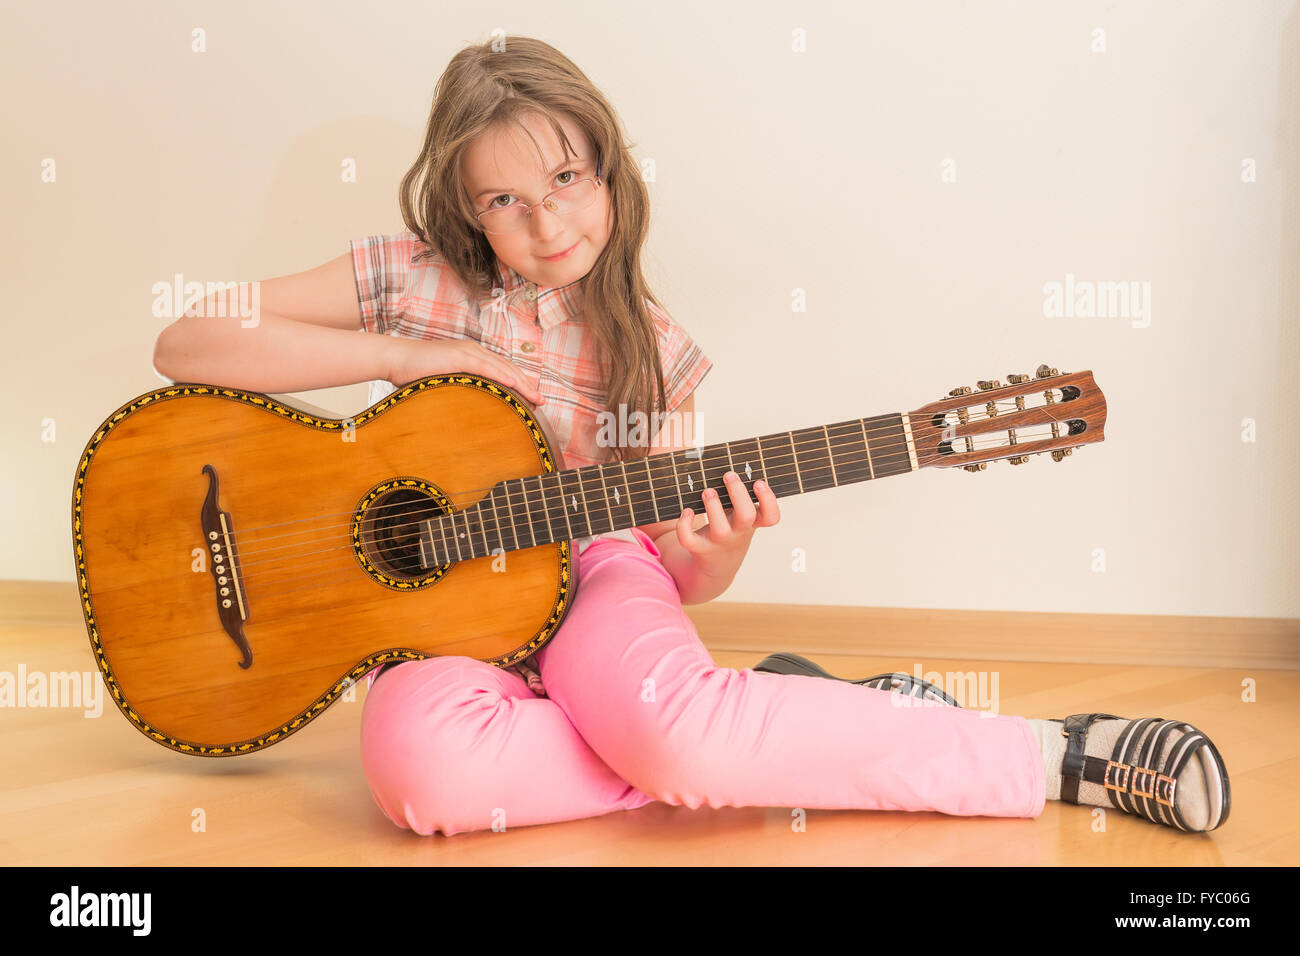 Girl sitting on floor with russian seven-string acoustic guitar Stock Photo